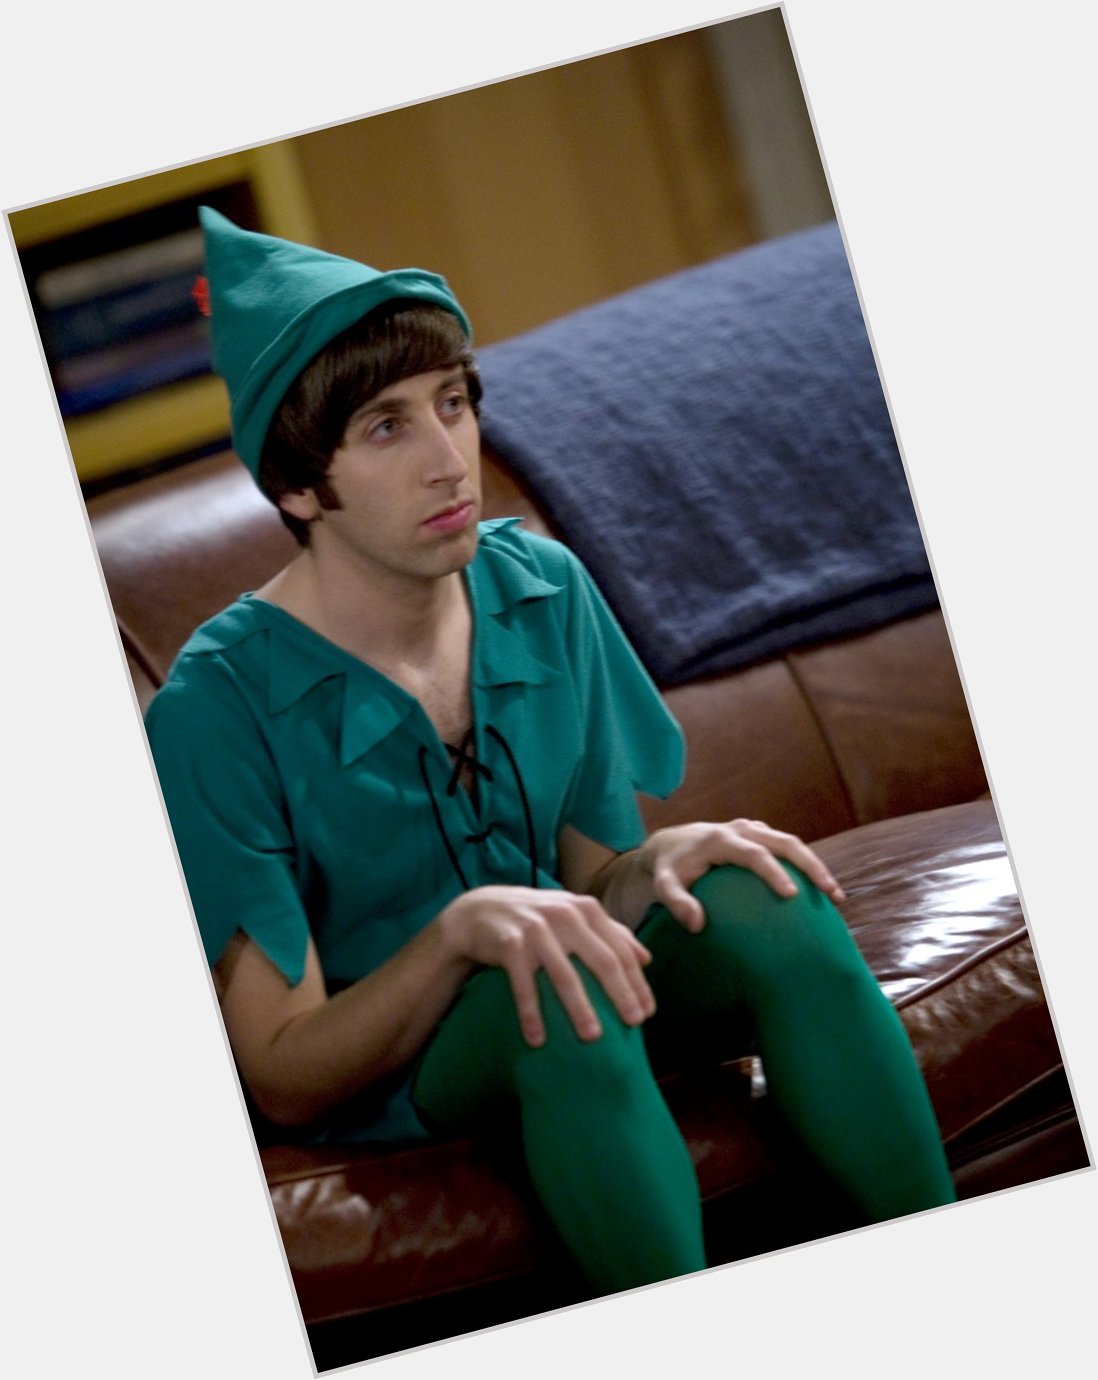 Happy Birthday to this elf on a s h e l f couch, Simon Helberg! 